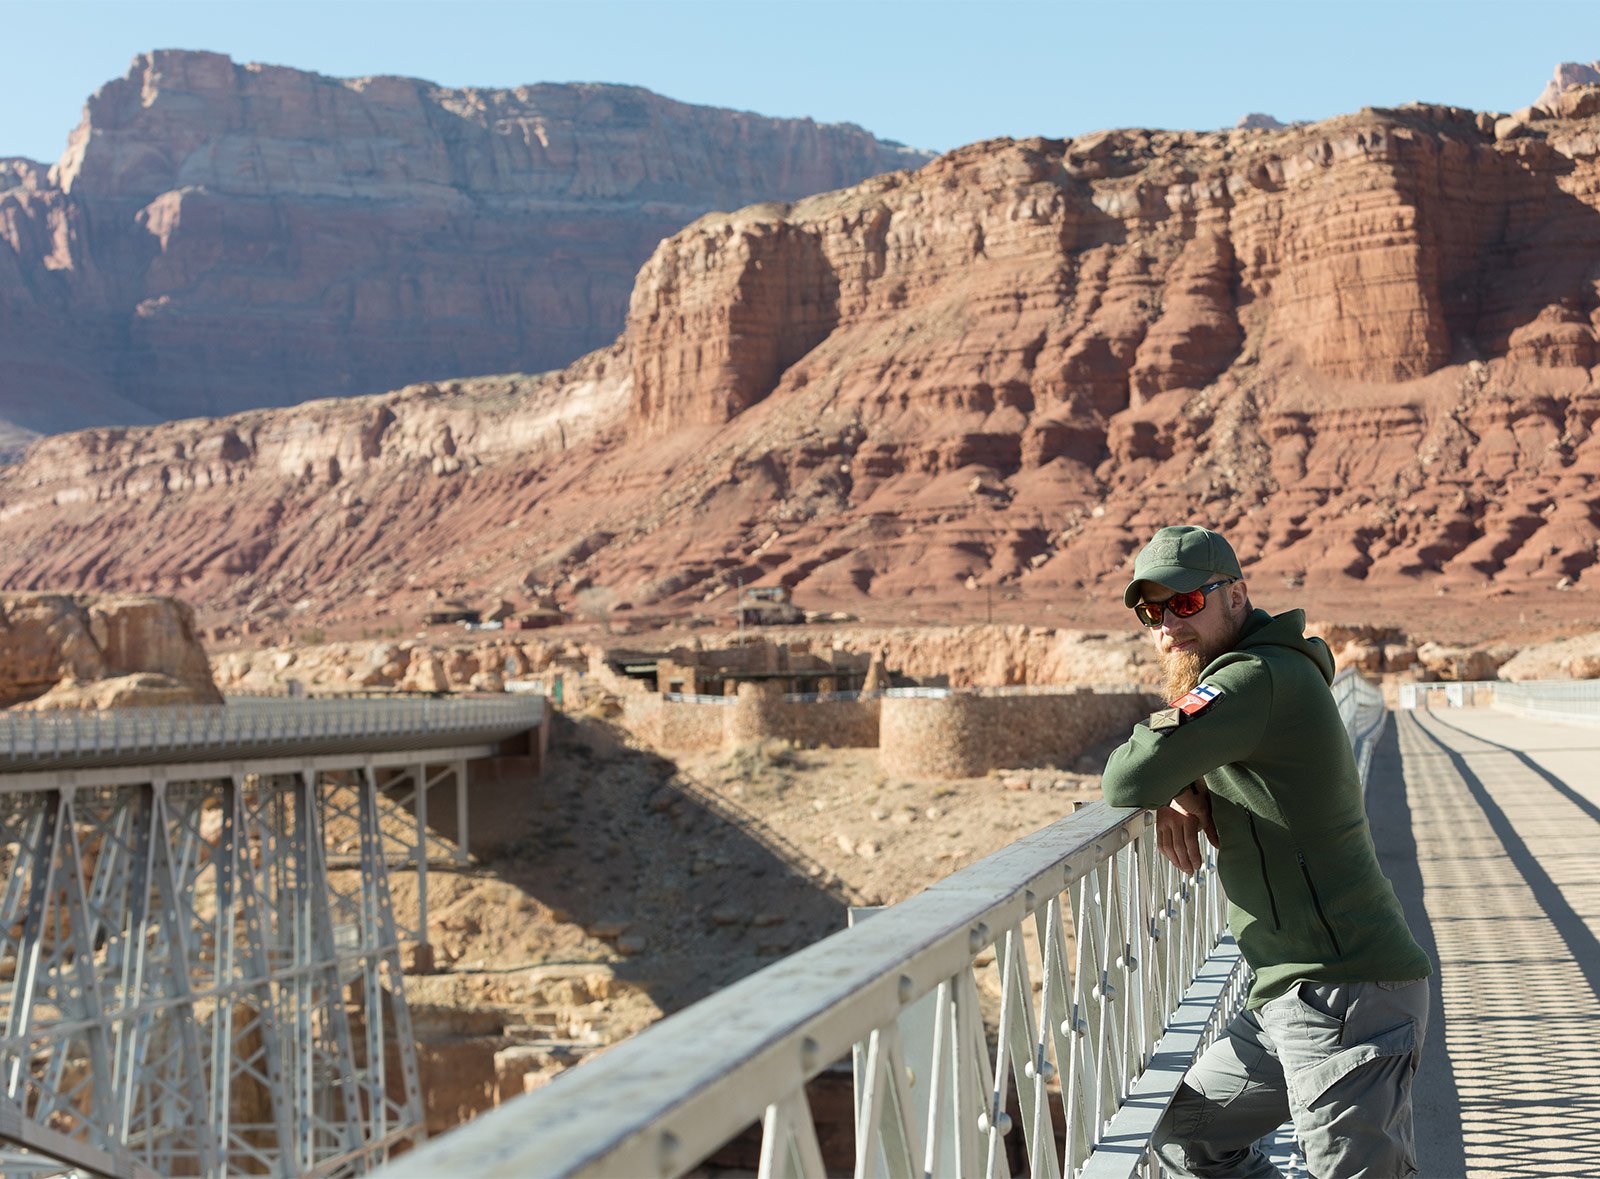 A man leaning on to a bridge railing, surrounded by brown cliffs.